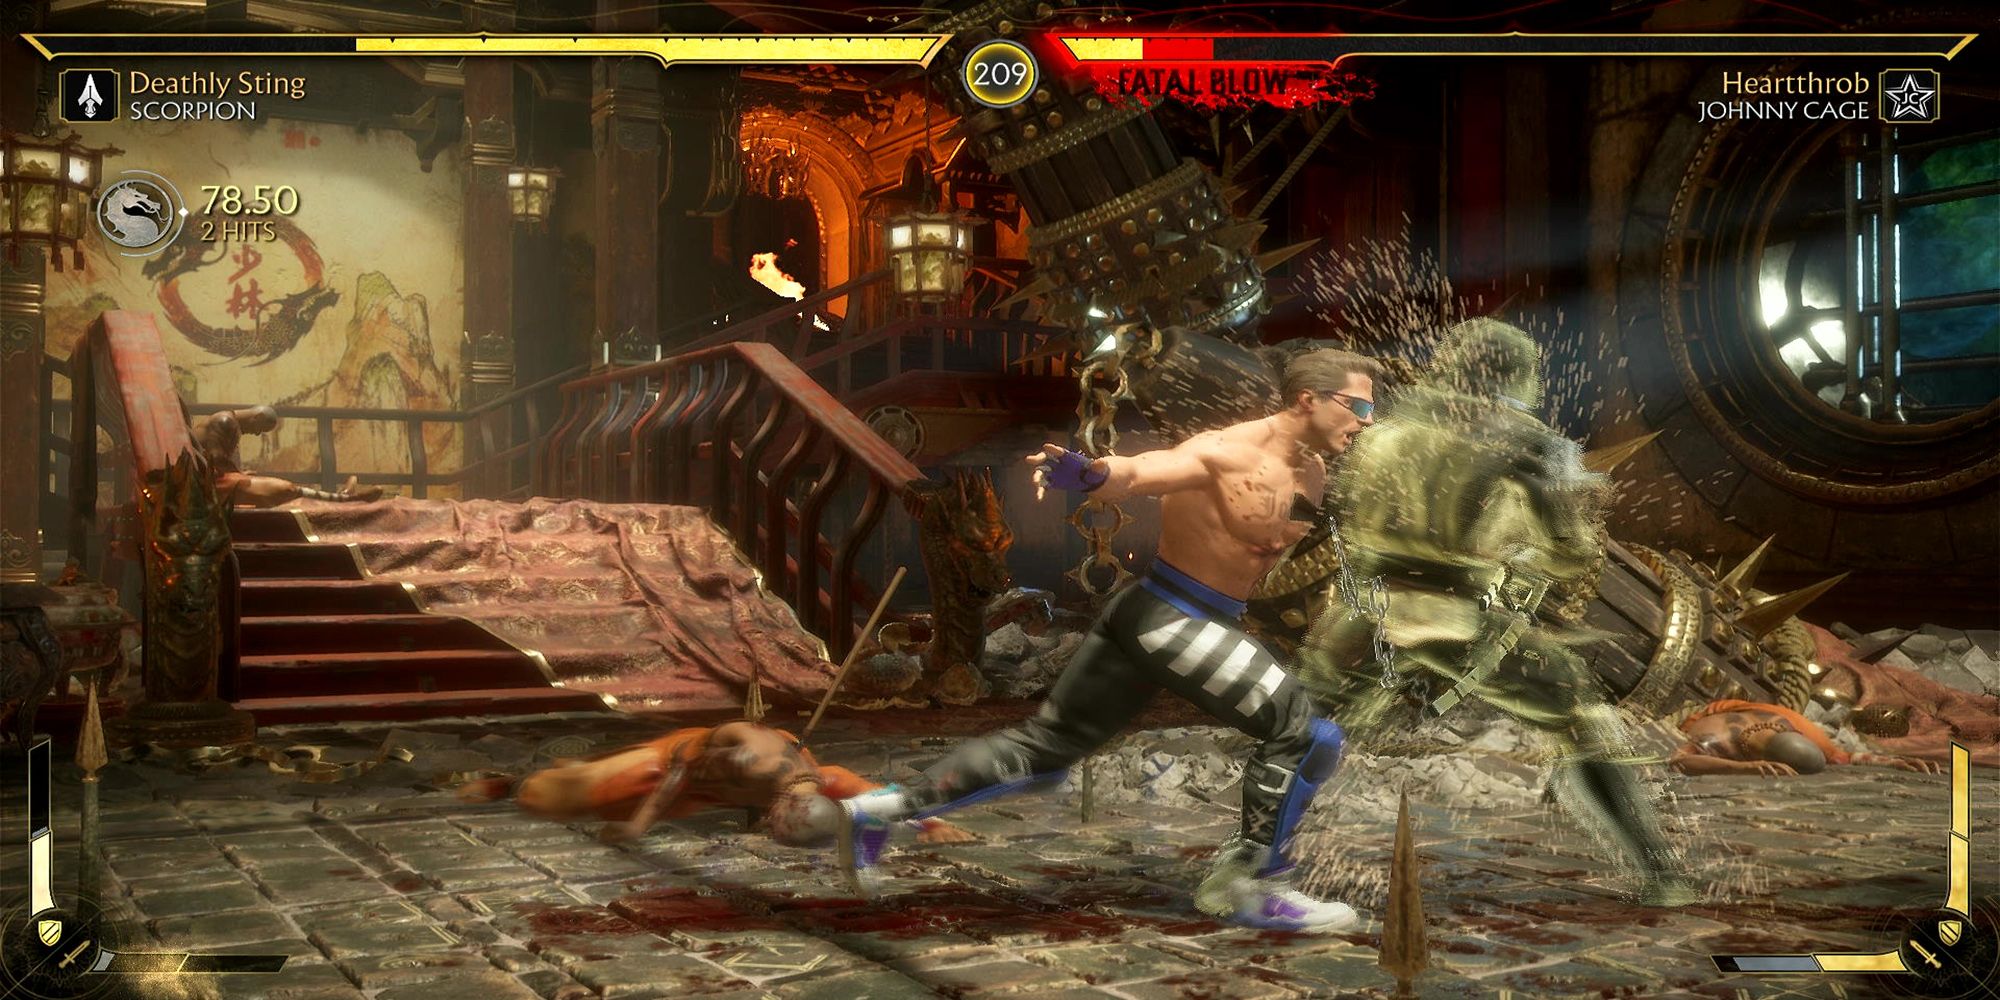 Scorpion unleashes an amplified spear special move on Johnny Cage in the Shaolin Trap Dungeon in Mortal Kombat 11.